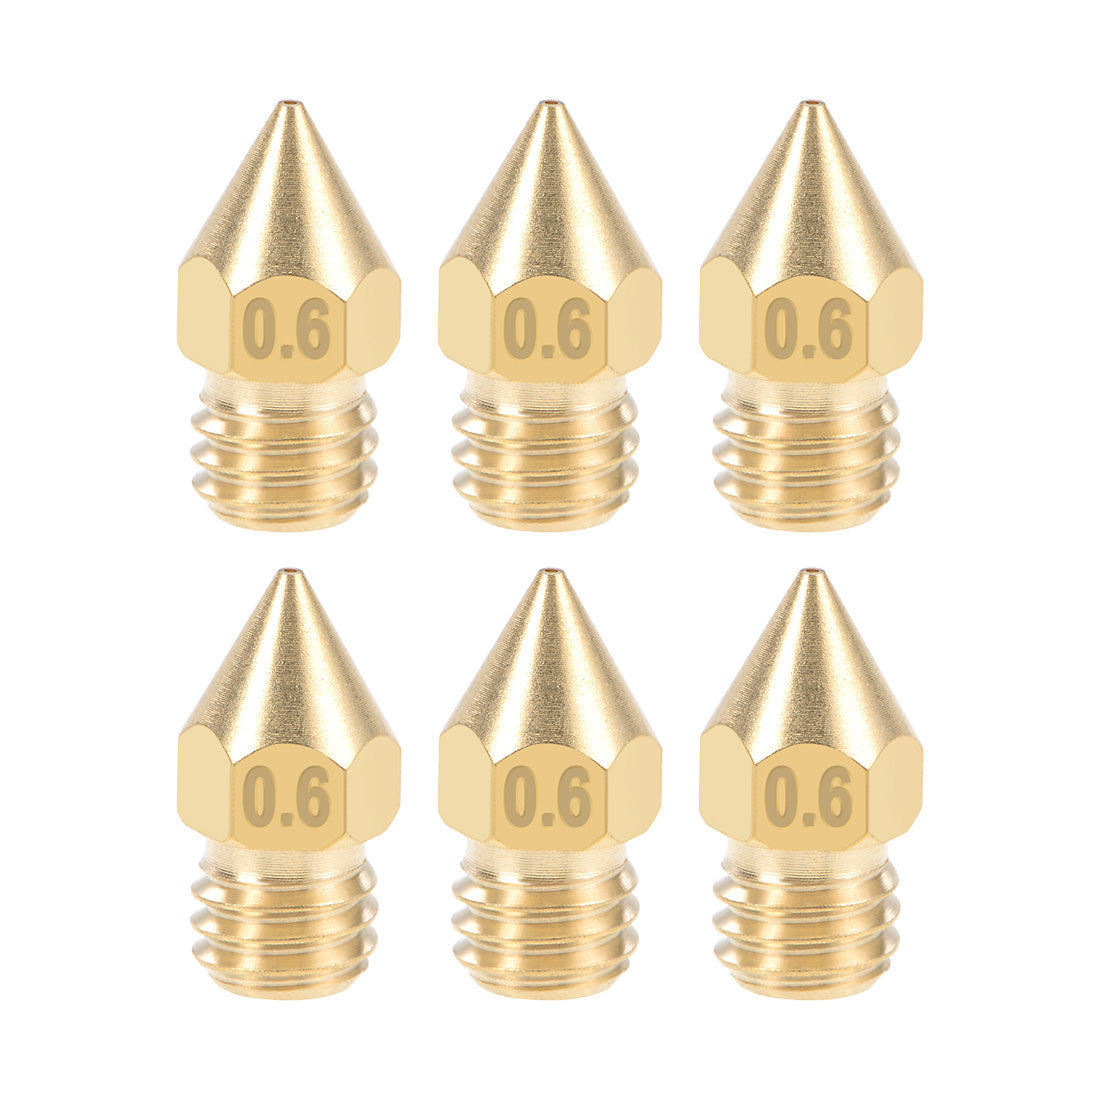 uxcell Uxcell 0.6mm 3D Printer Nozzle Head M6 Thread Replacement for MK8 1.75mm Extruder Print, Brass 6pcs